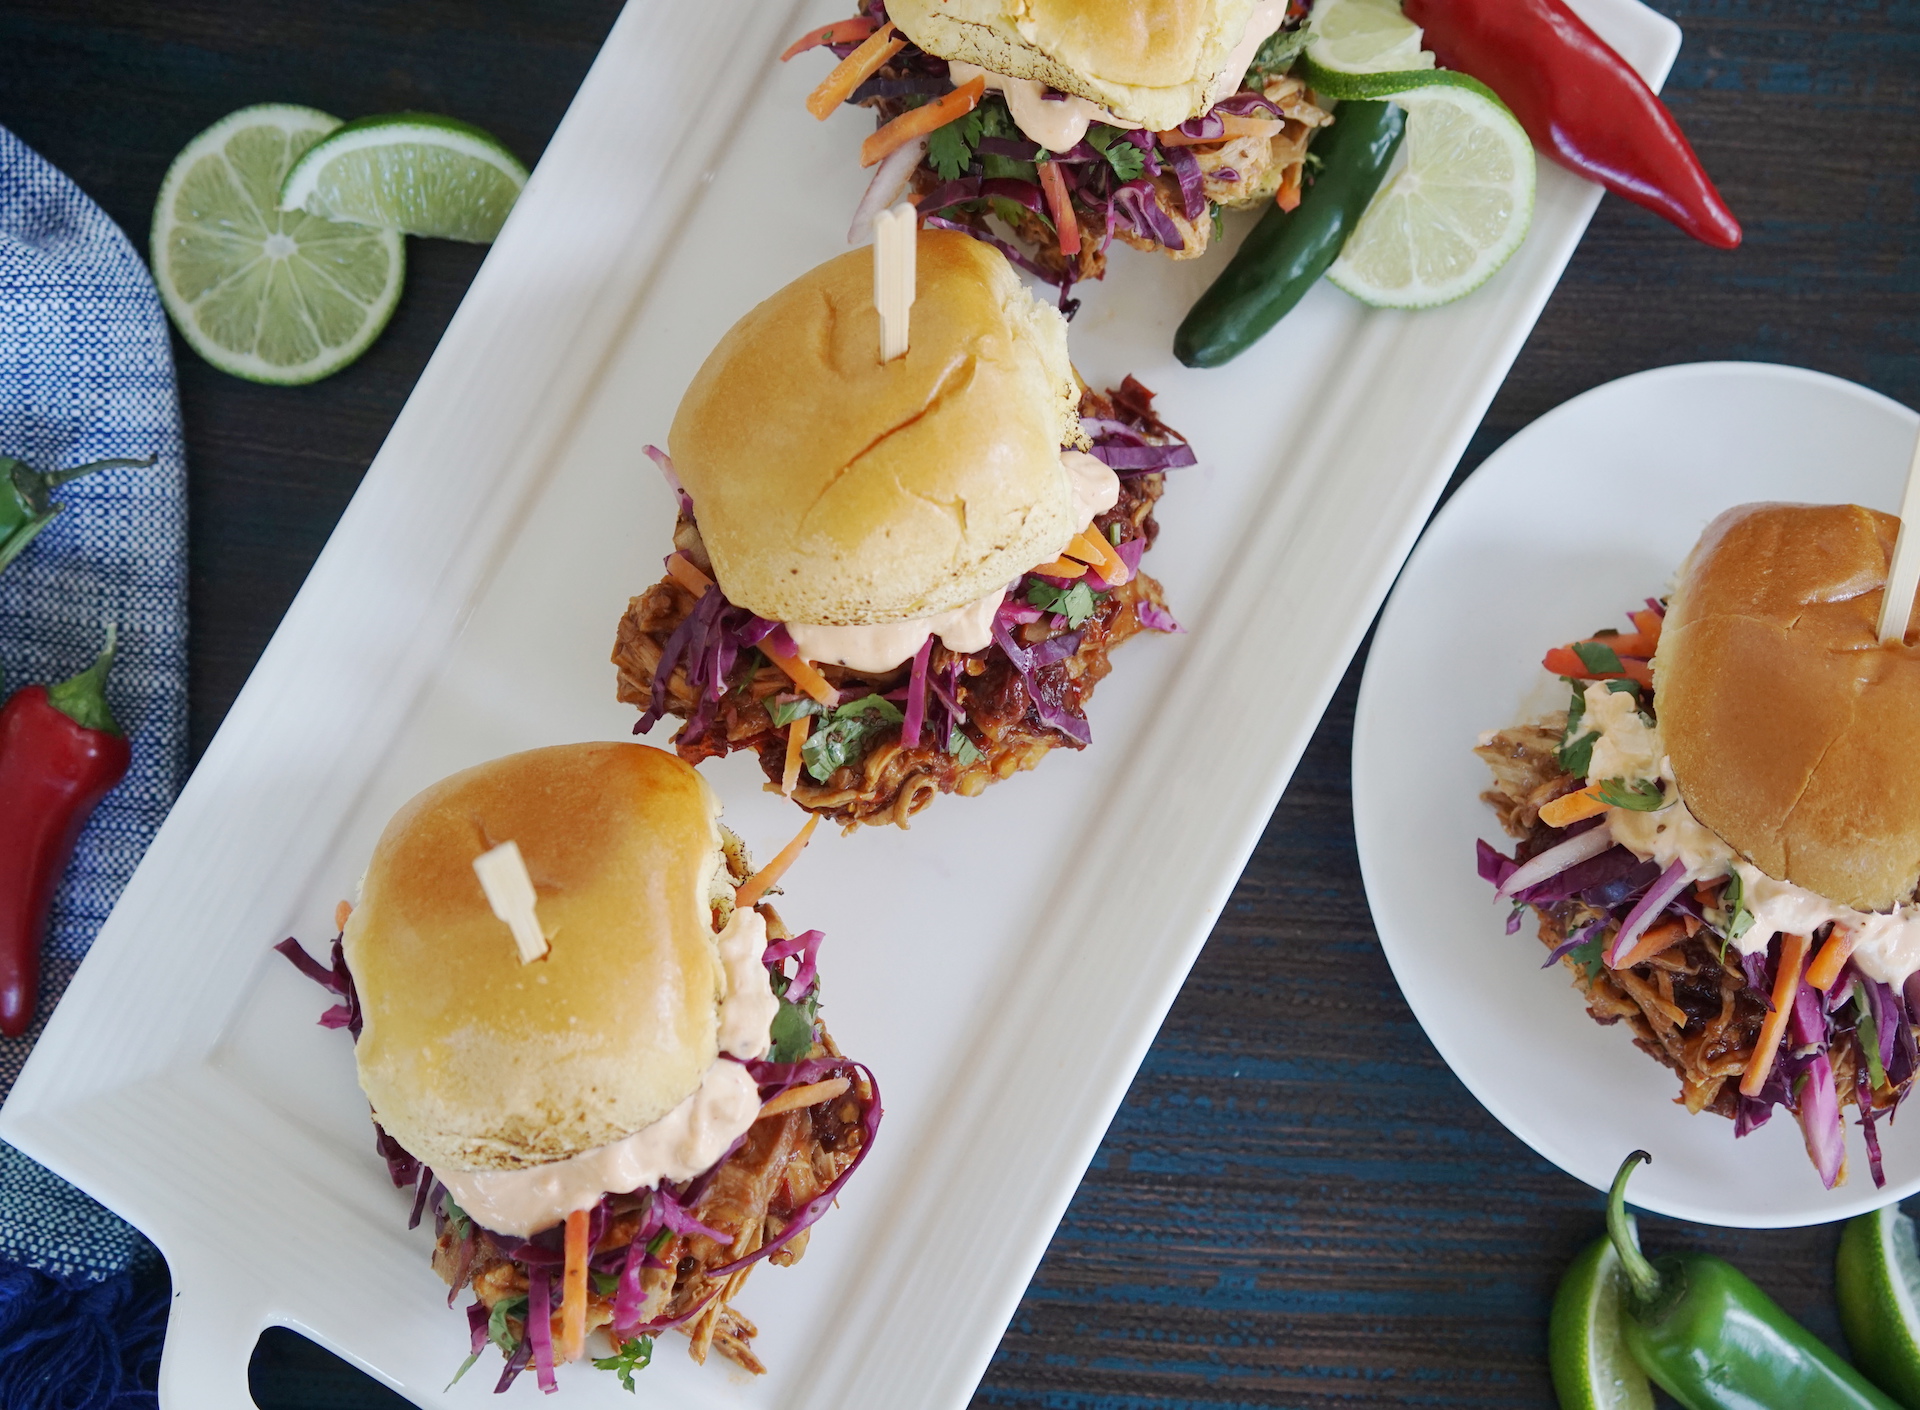 Beach Blonde Crafted Carnitas Sliders with Key Lime Cider Cilantro Slaw and Chipotle Cream